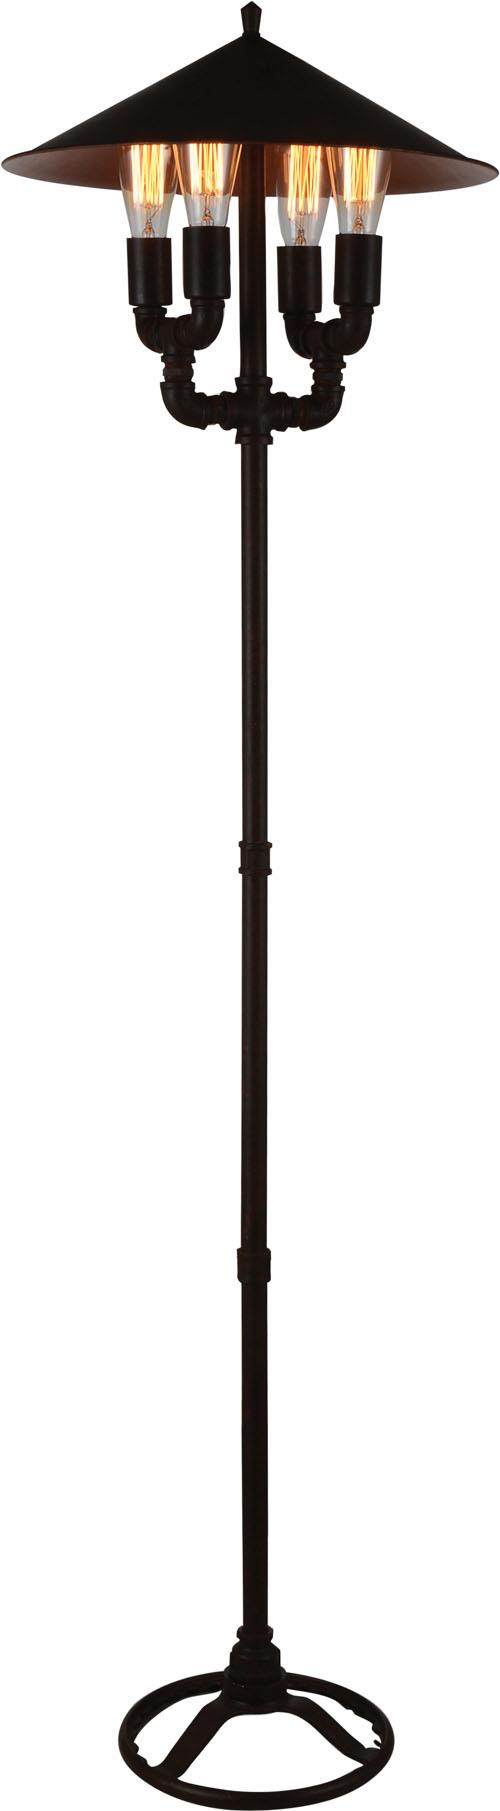 Coln 65" Floor Lamp with Metal Cone Shade - Black